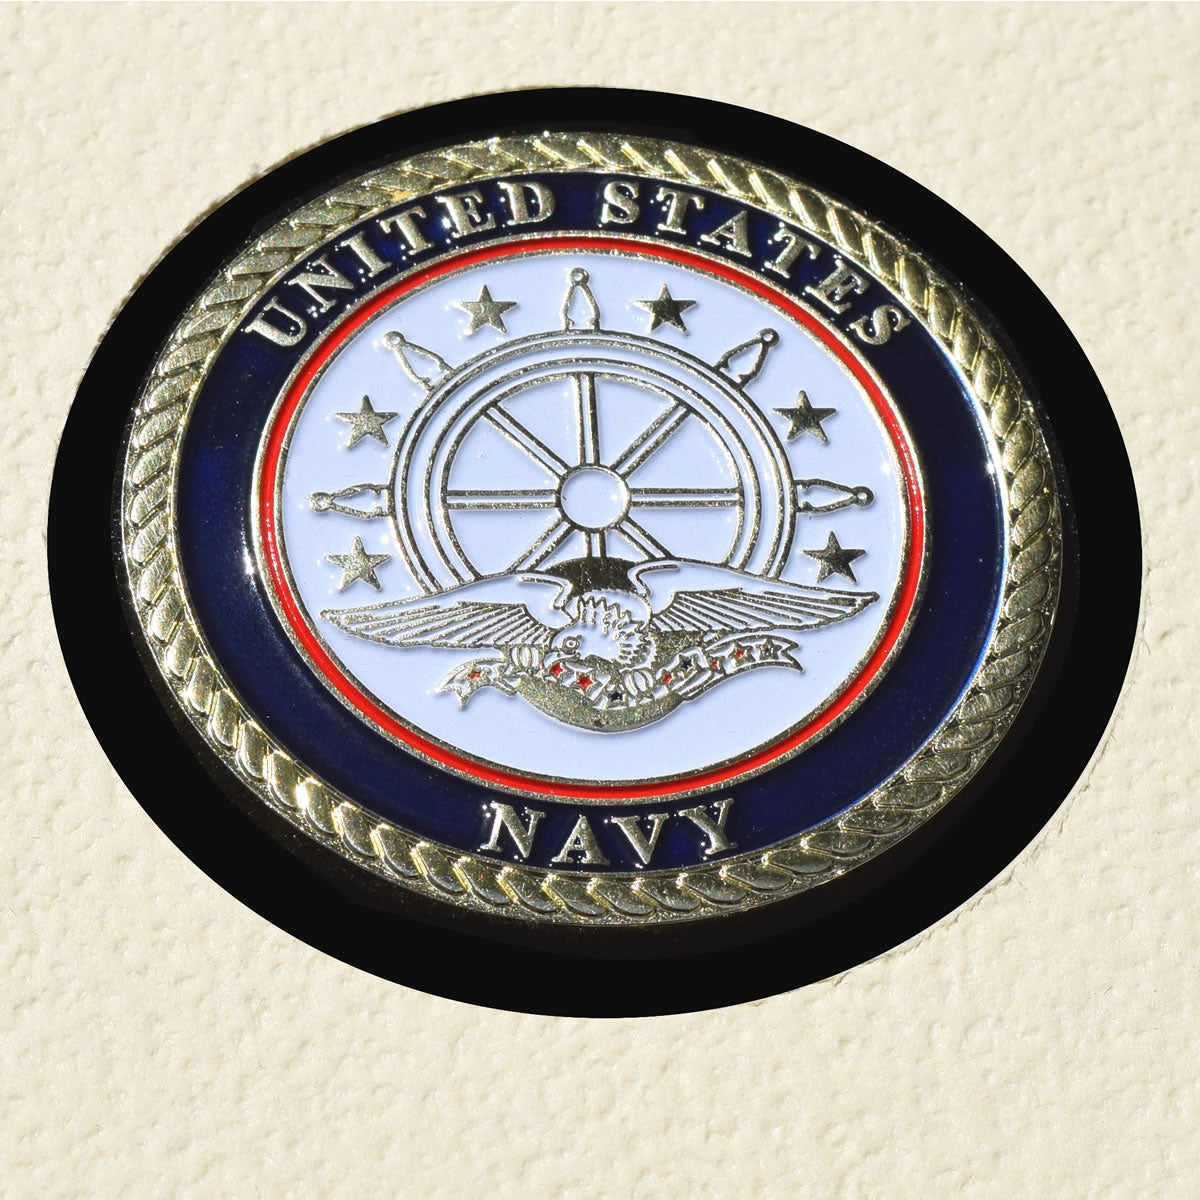 USS NEW DD-818 Detailed Coin